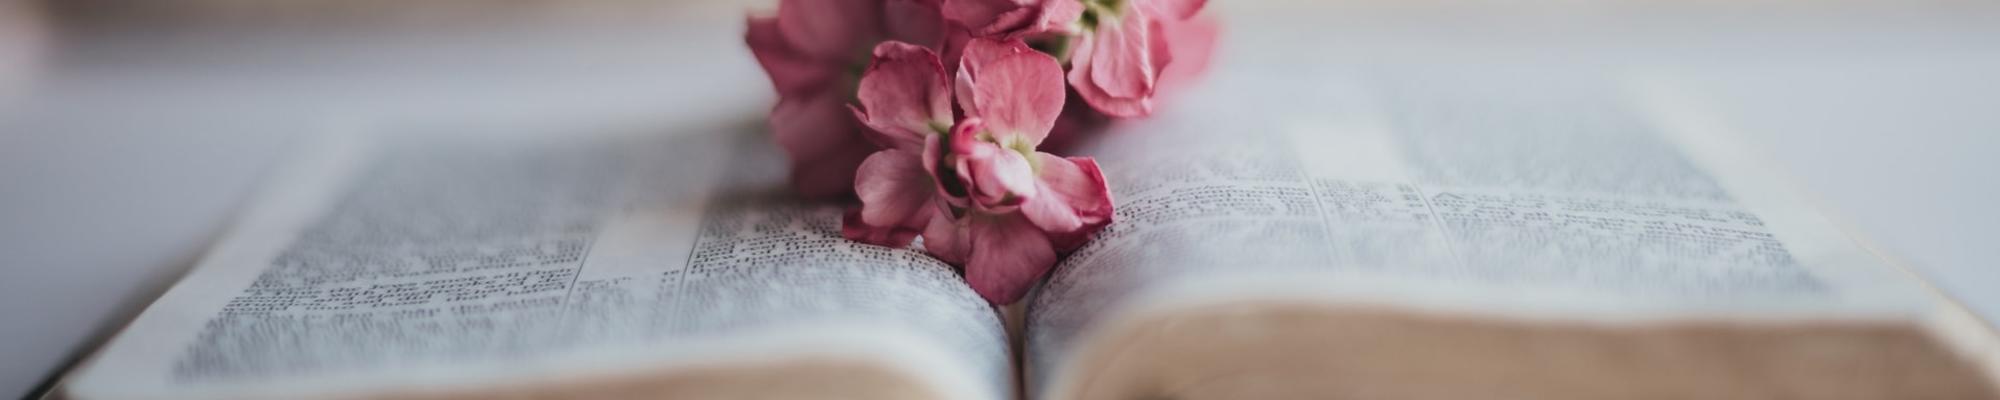 Pink flowers on book page